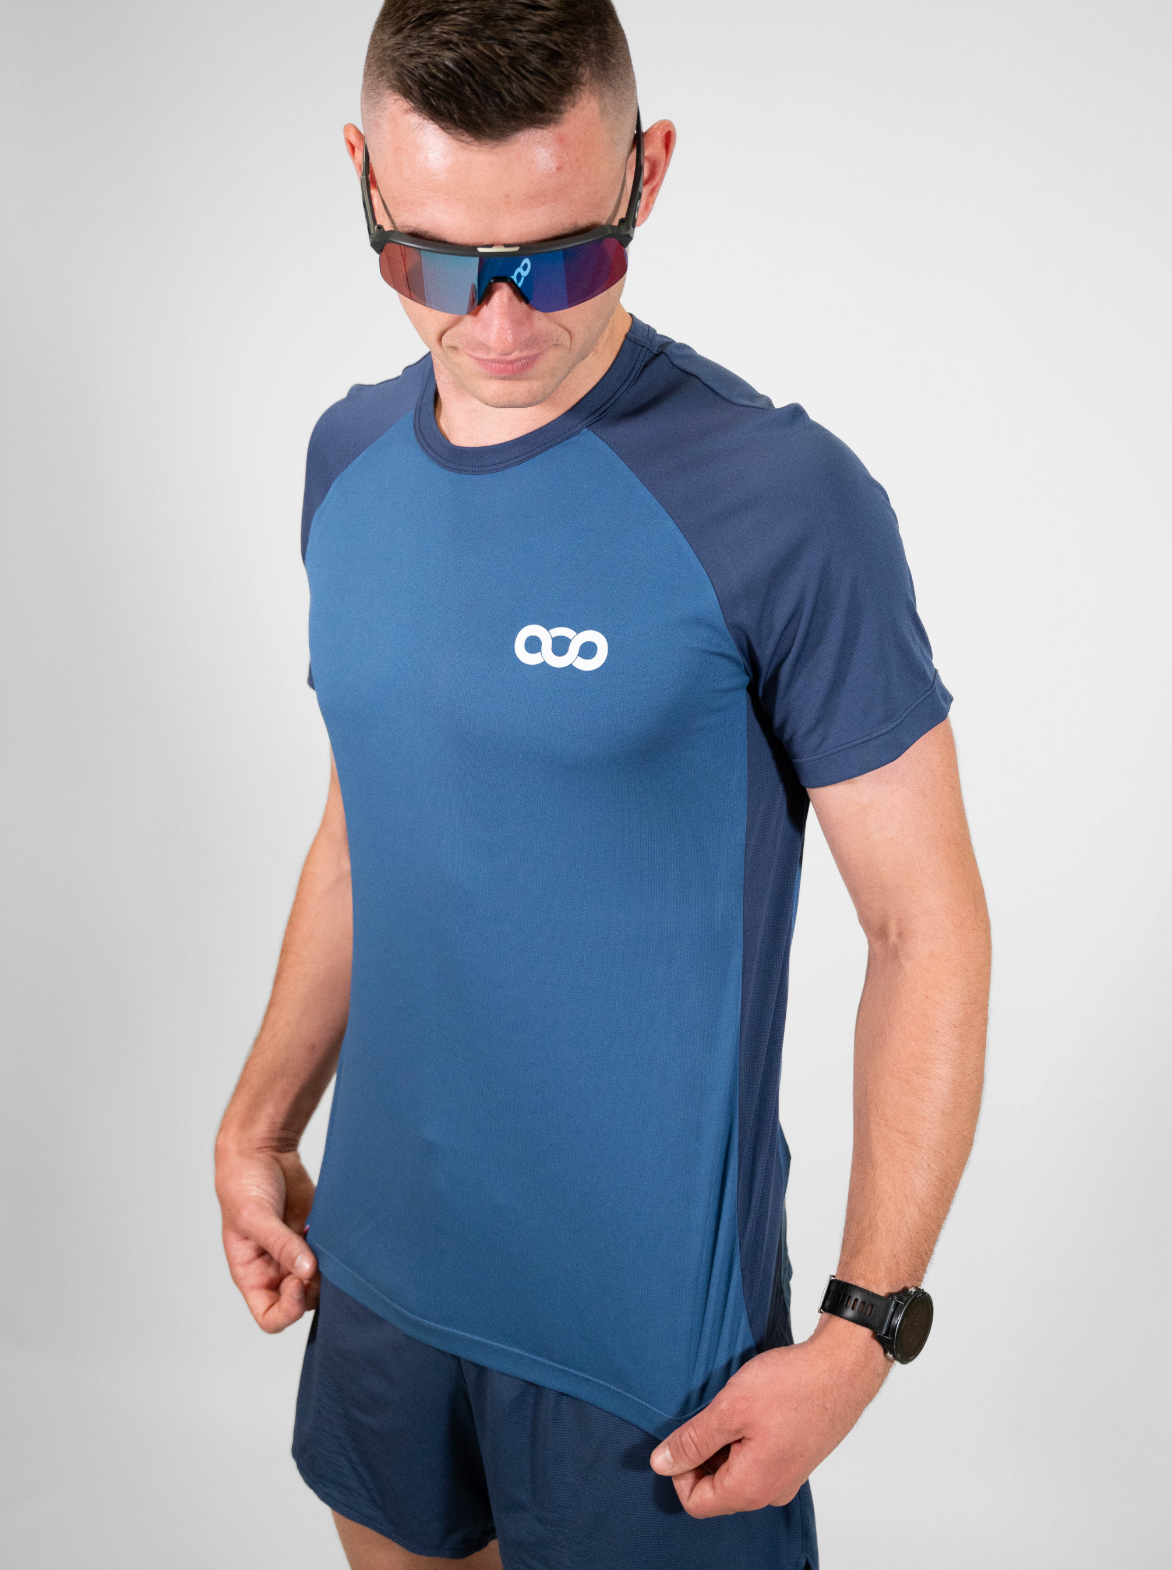 Men's Sustainable Running T-Shirt Made in France — TOULON